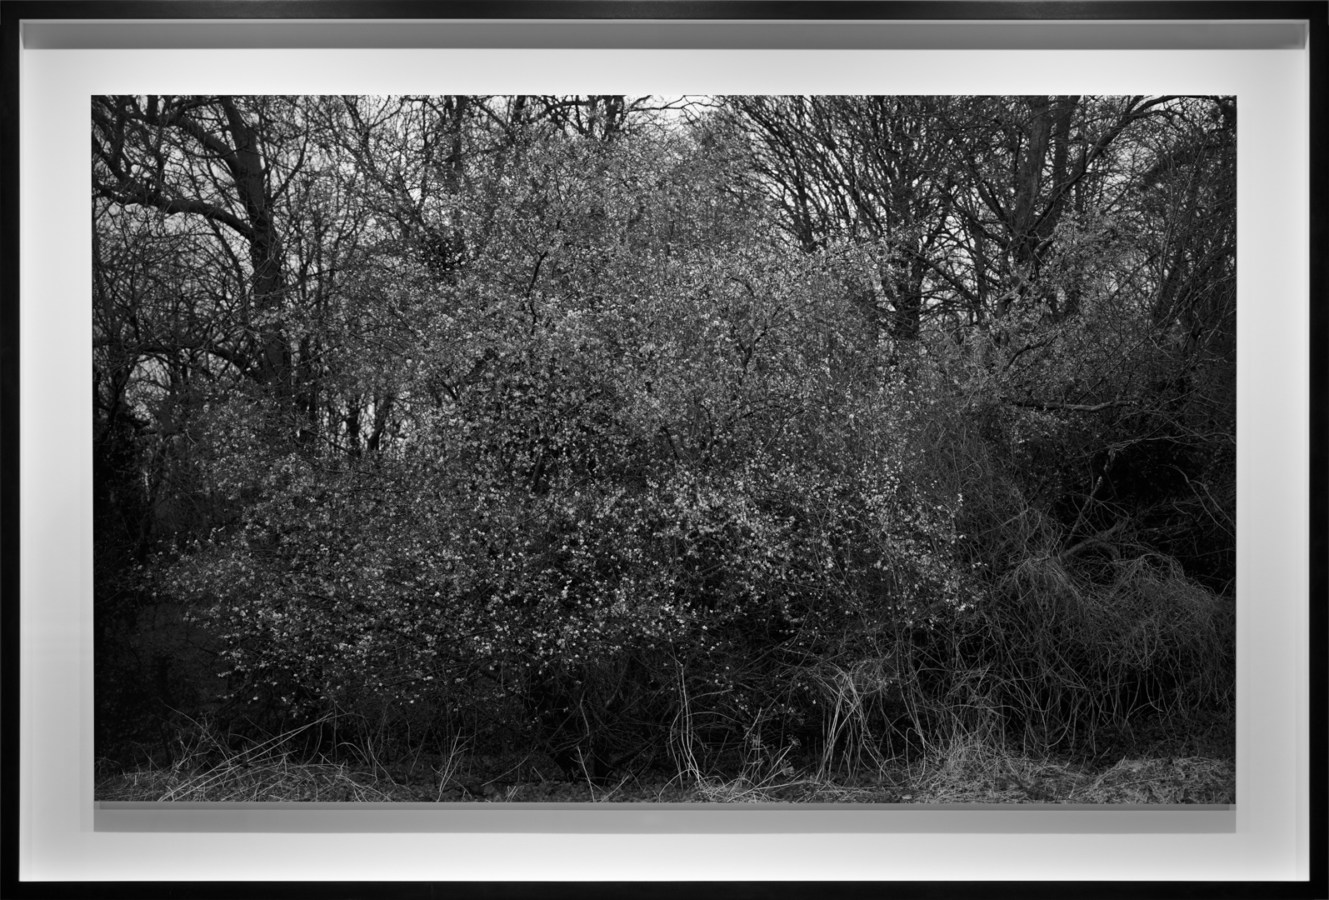 Black-and-white photograph of a low shrub against bare trees